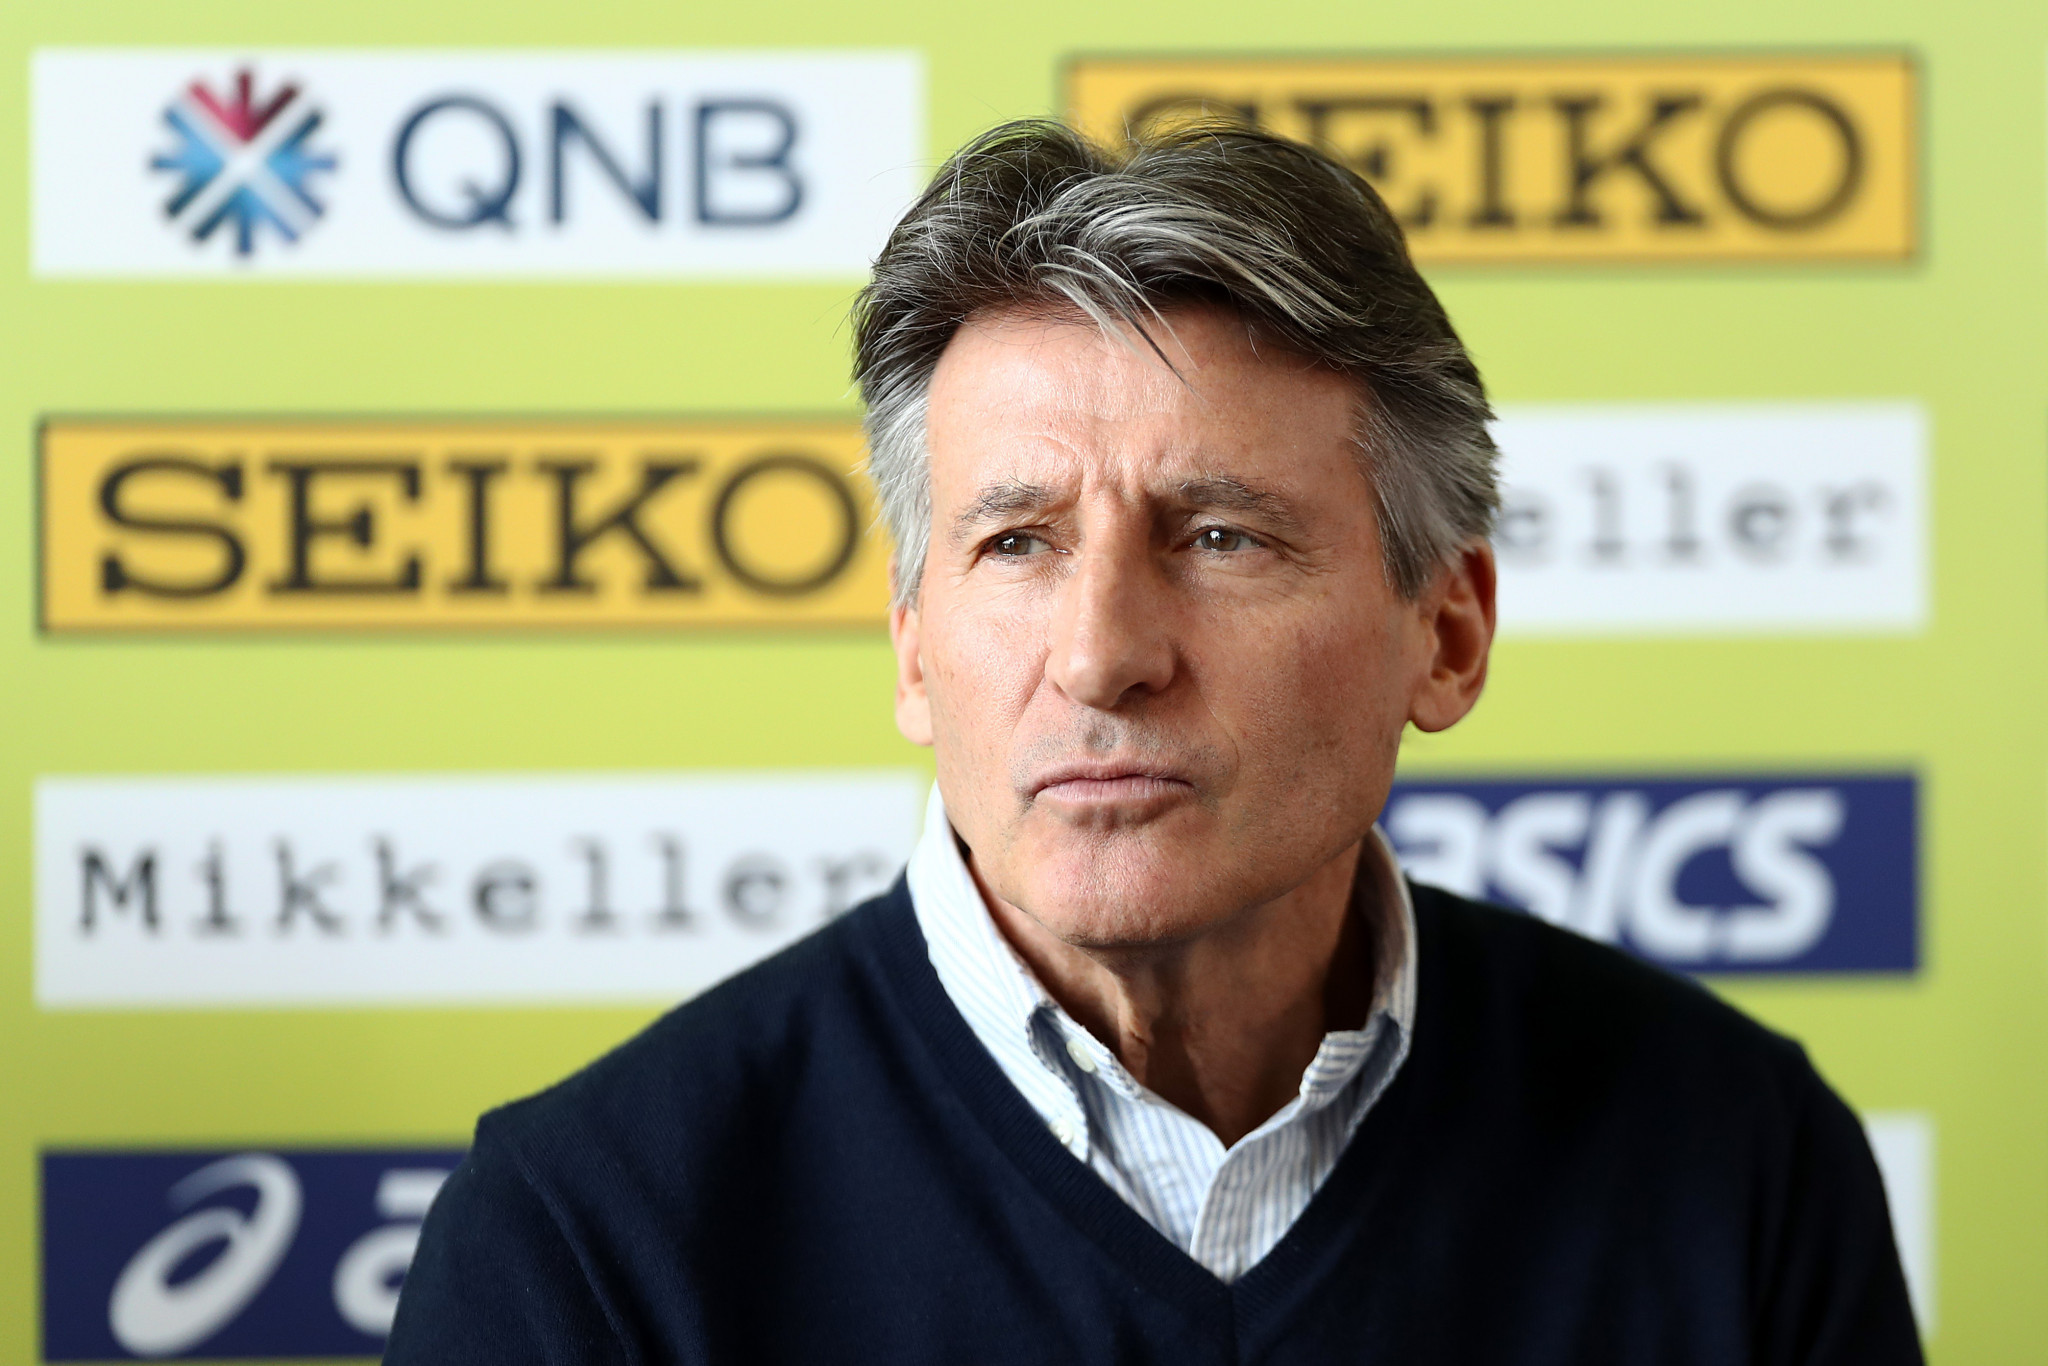 Athletics South Africa accuses IAAF and Sebastian Coe of breaching confidentiality rules with repeated statements on Semenya case